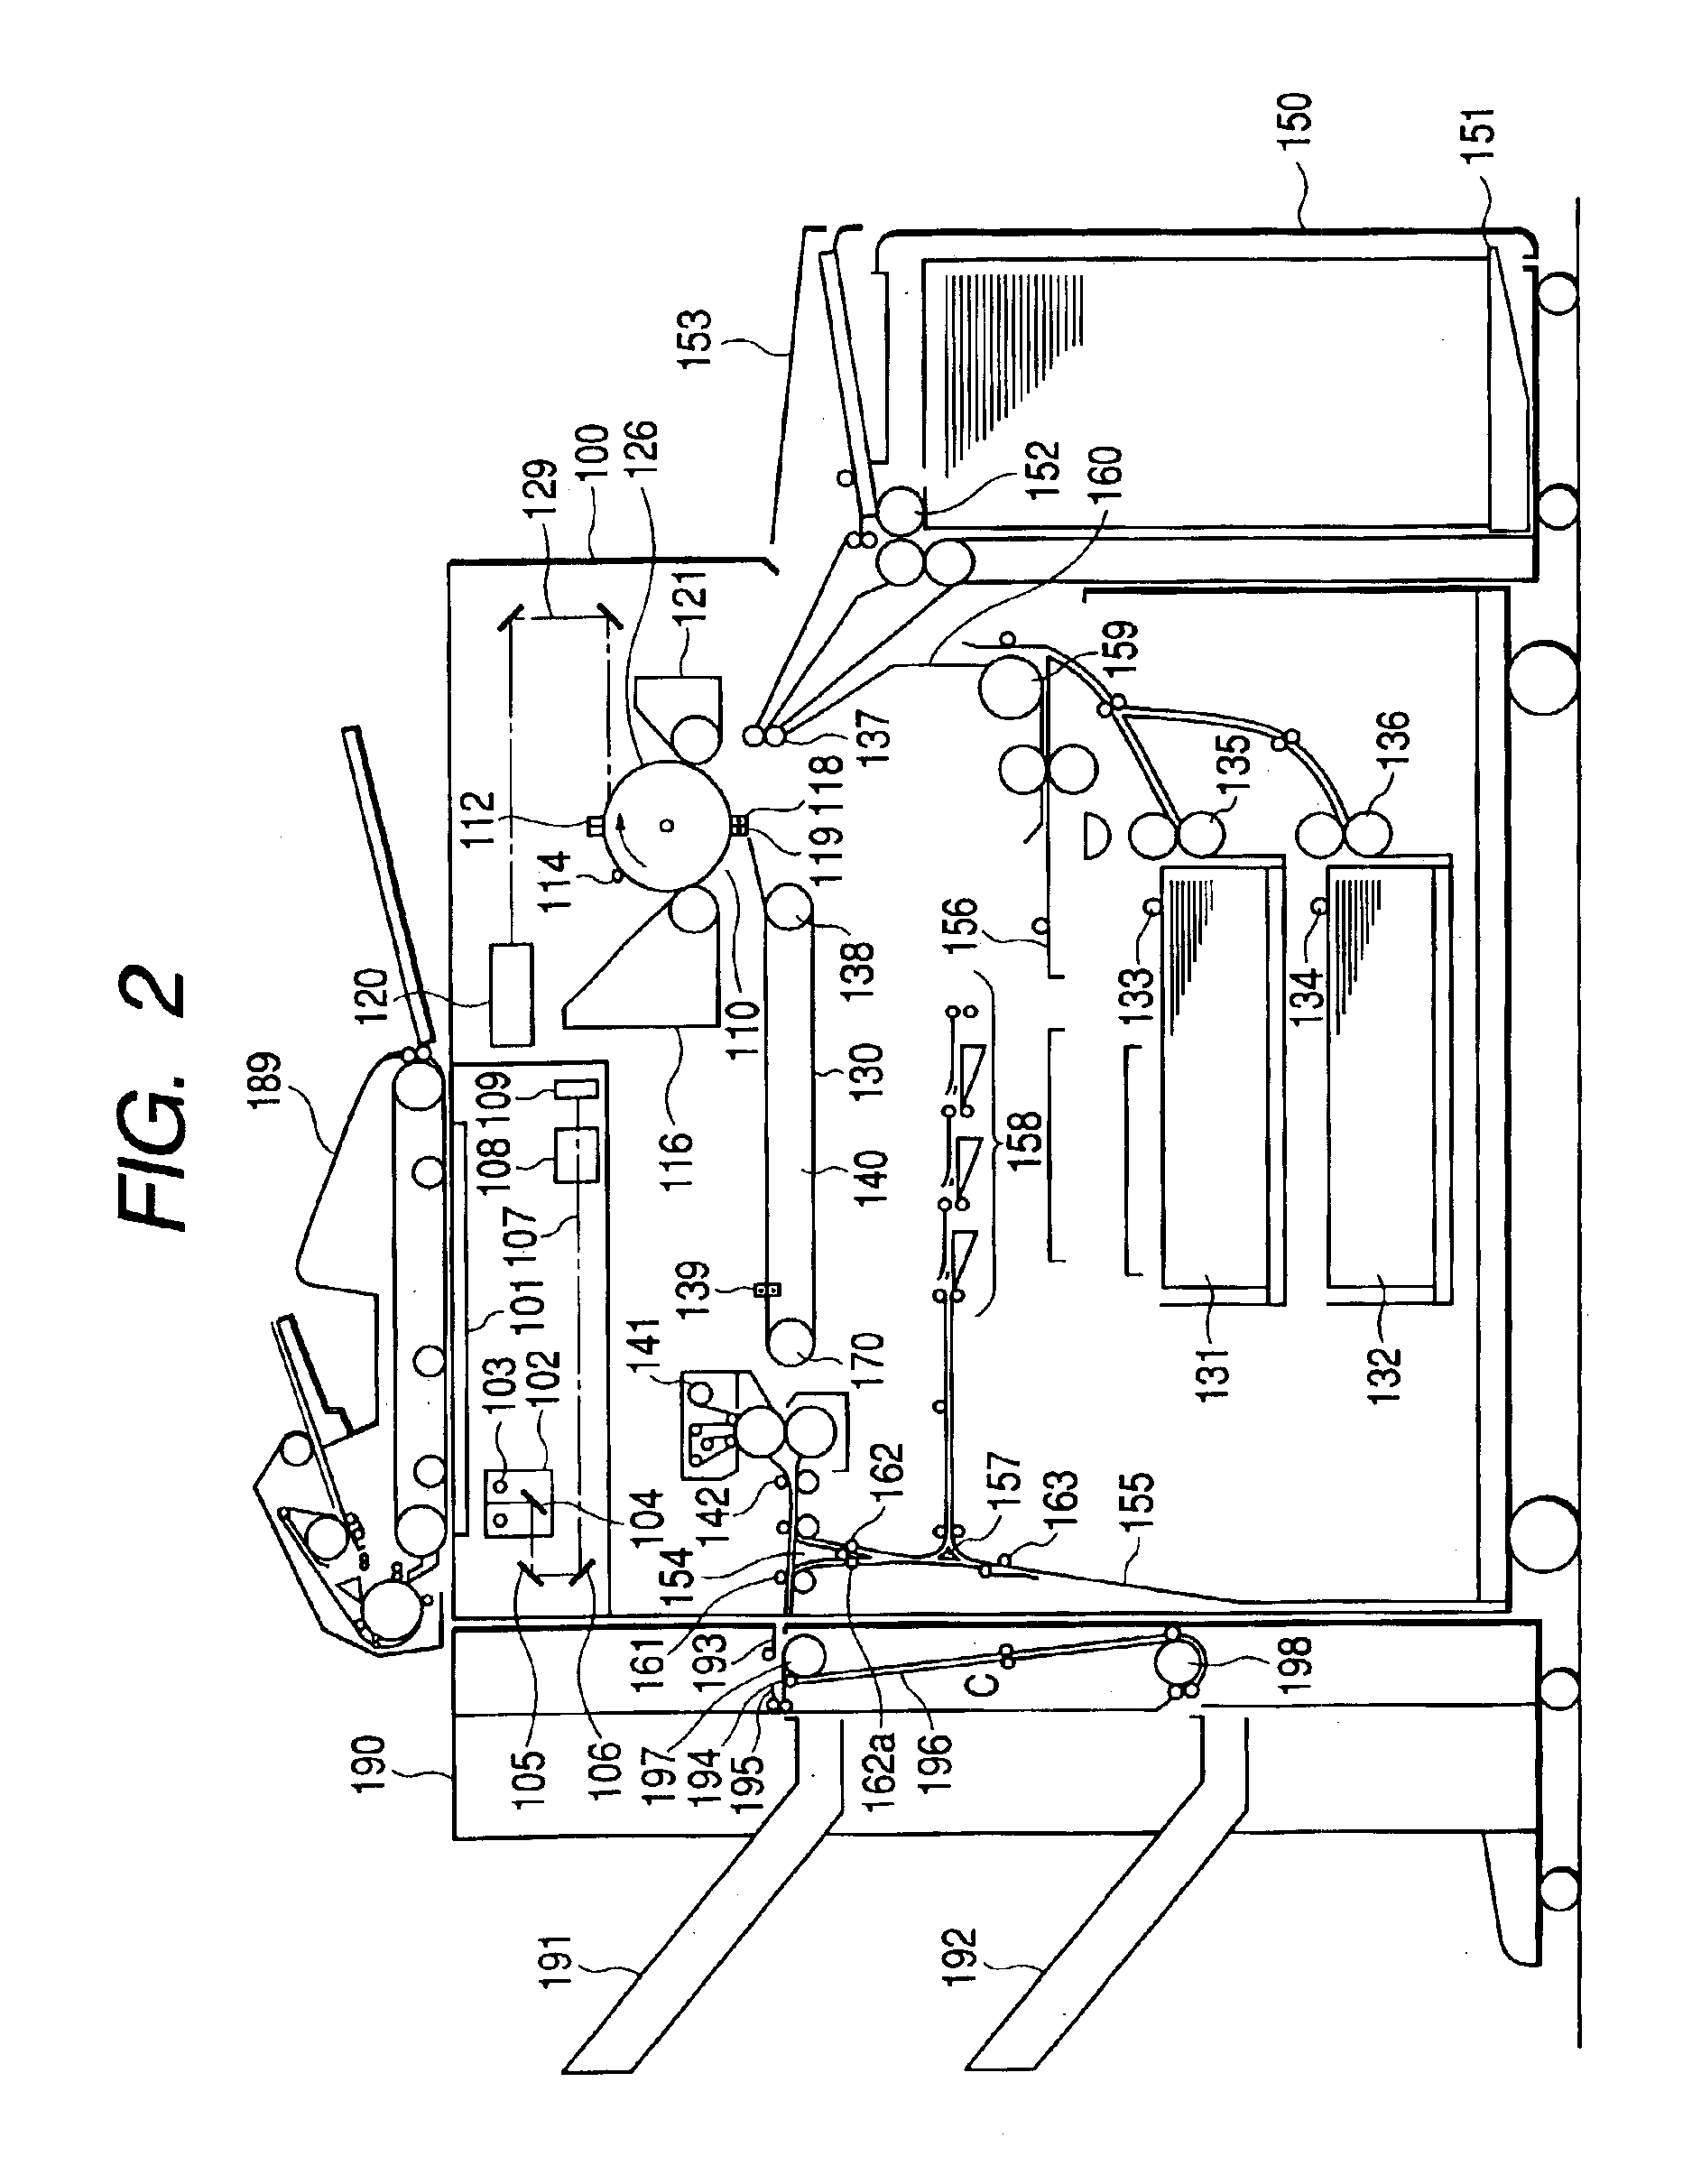 Image forming apparatus having display unit for displaying an executable program and control method thereof